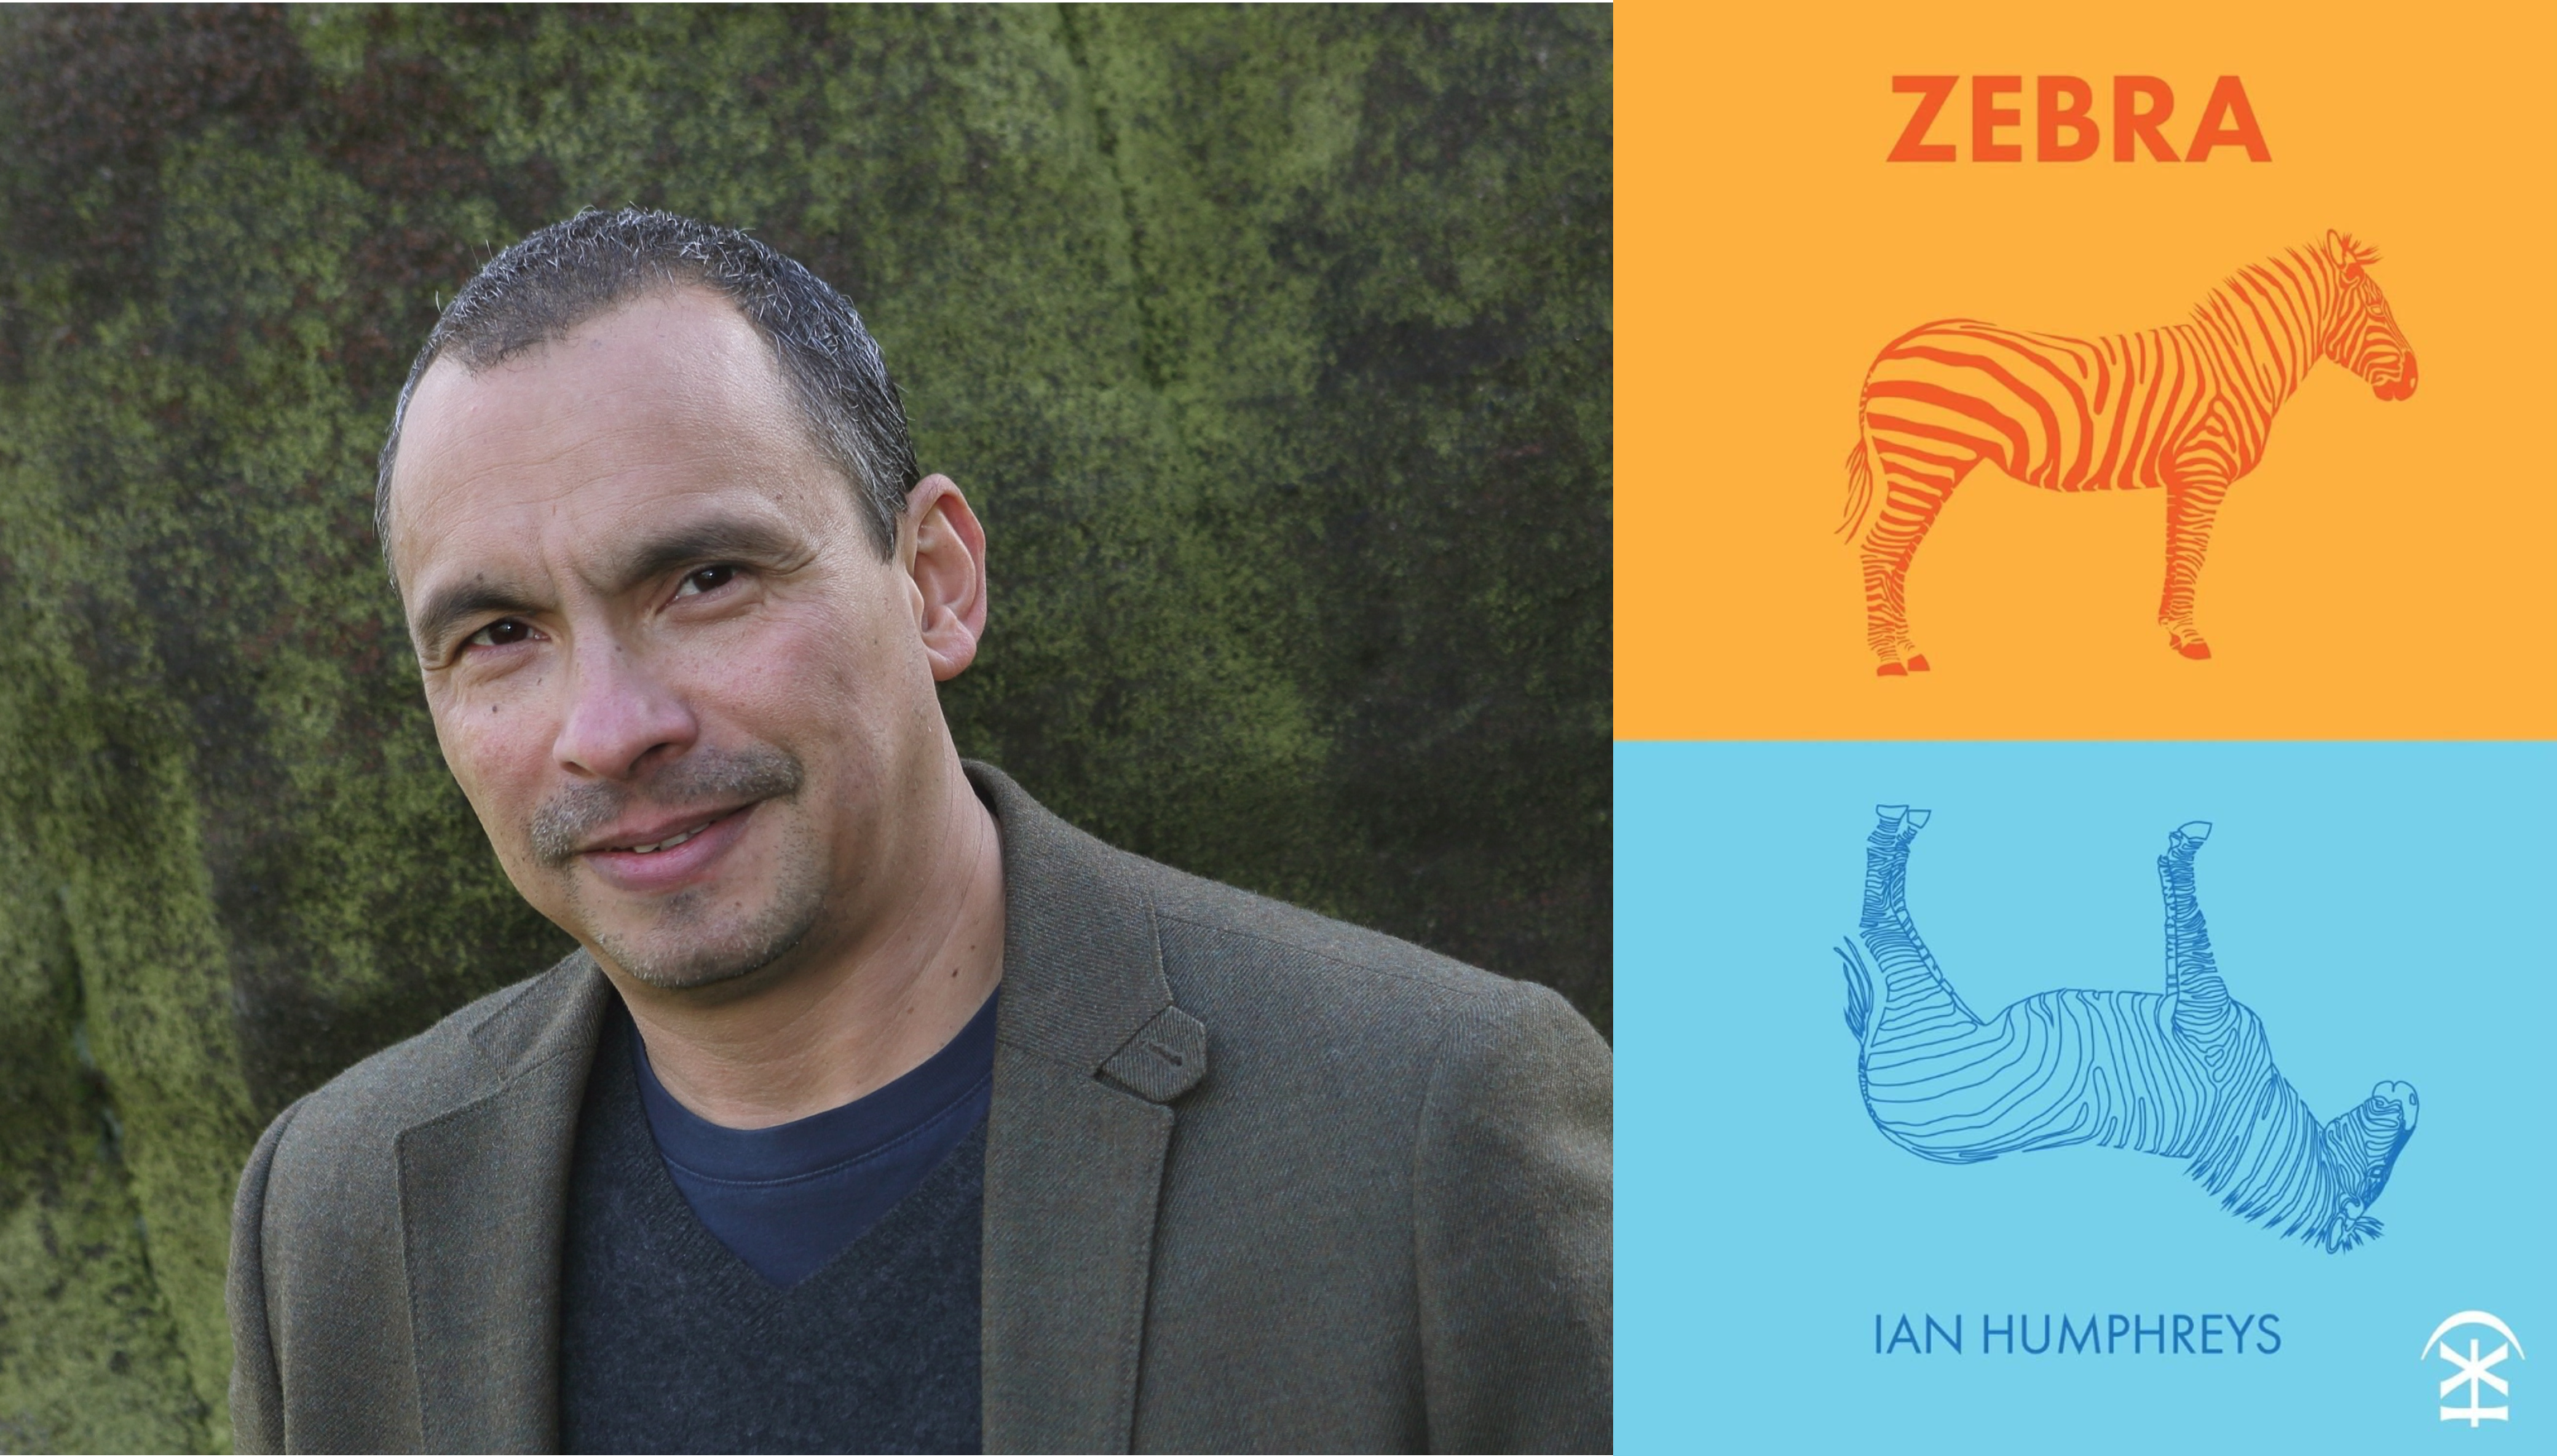 Ian graduated from Manchester Writing School's MA Creative Writing Poetry programme in 2016. He published his debut collection, Zebra, in April 2019.